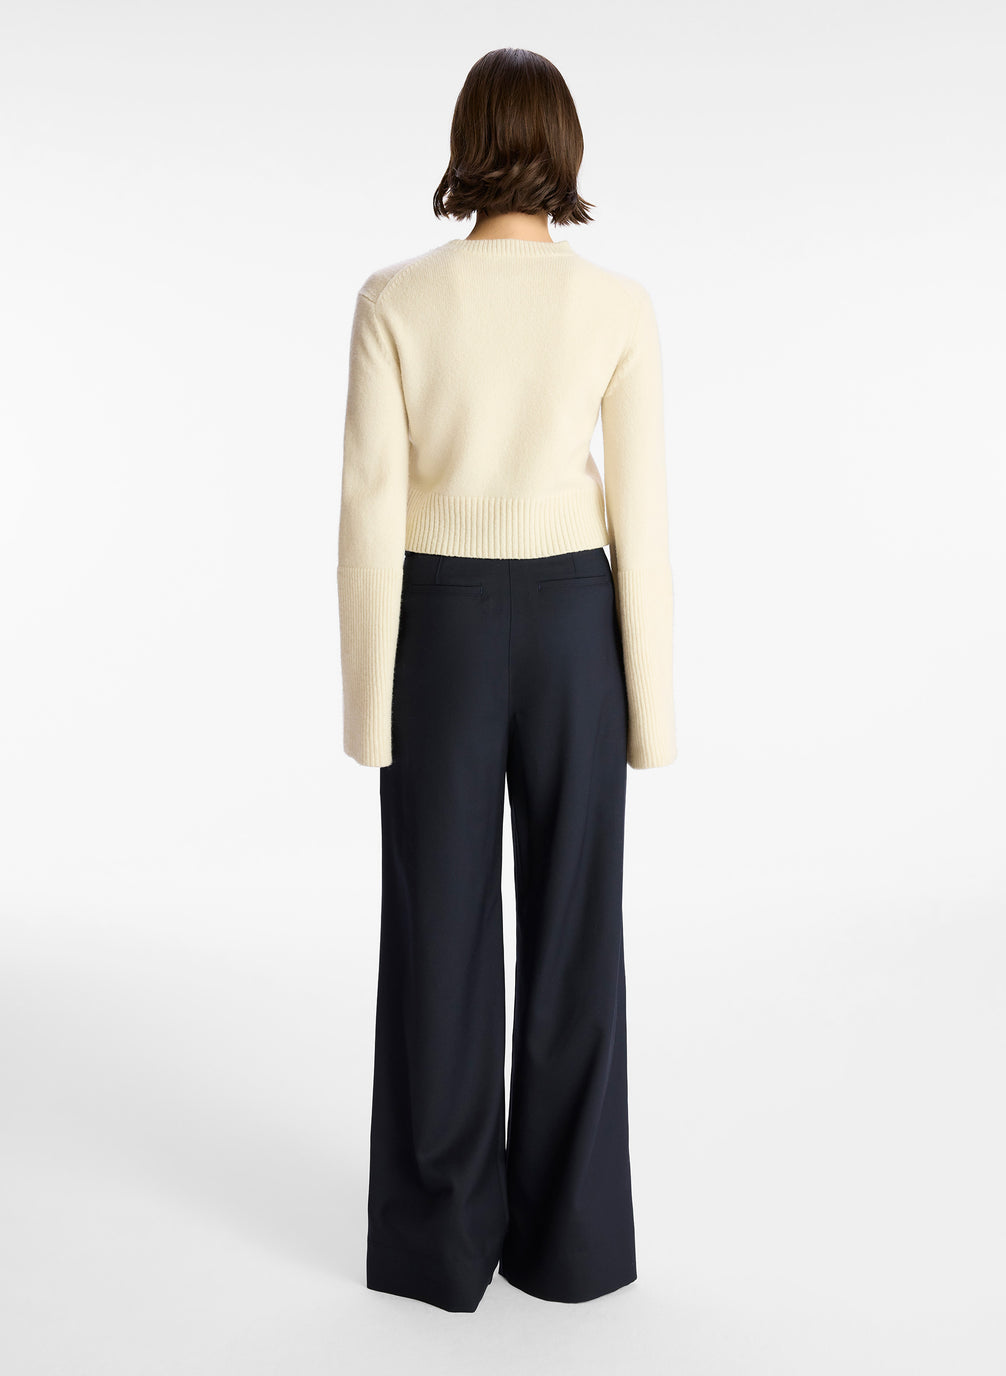 back  view of a woman wearing a cream sweater and navy wide leg pants